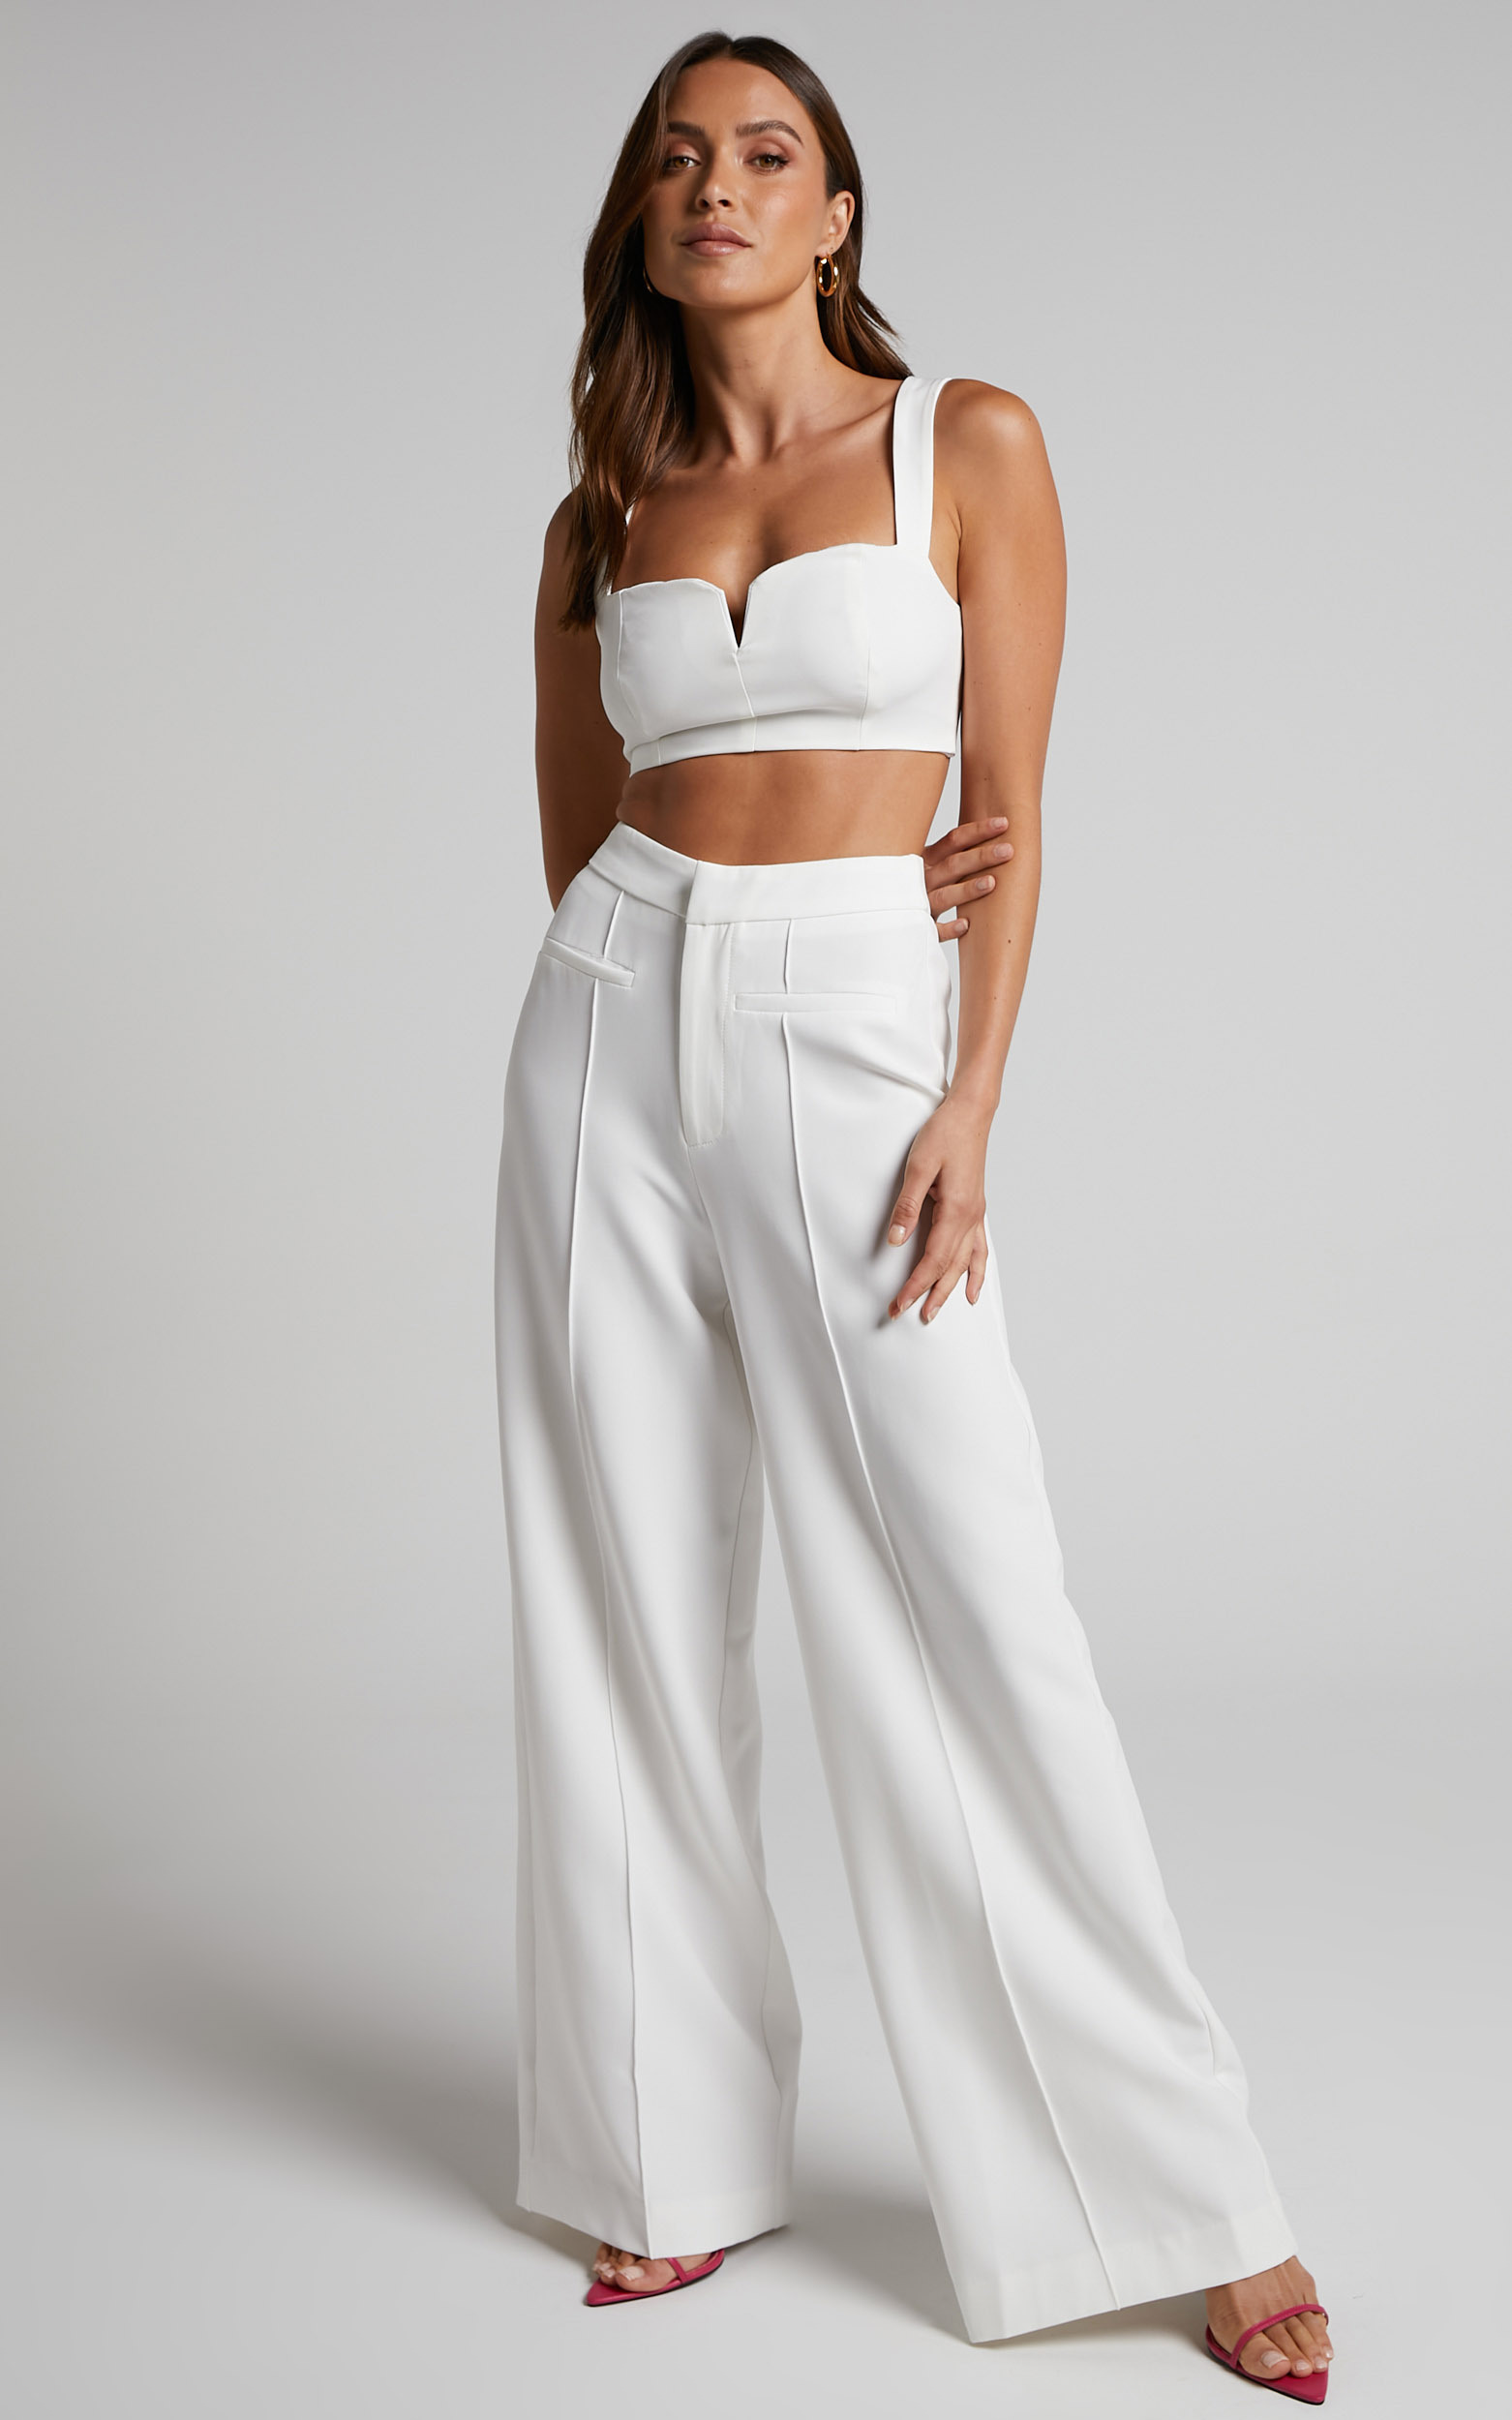 Maida V-Front Crop Top and Wide Leg Pants Two Piece Set in Ivory - 04, WHT1, hi-res image number null